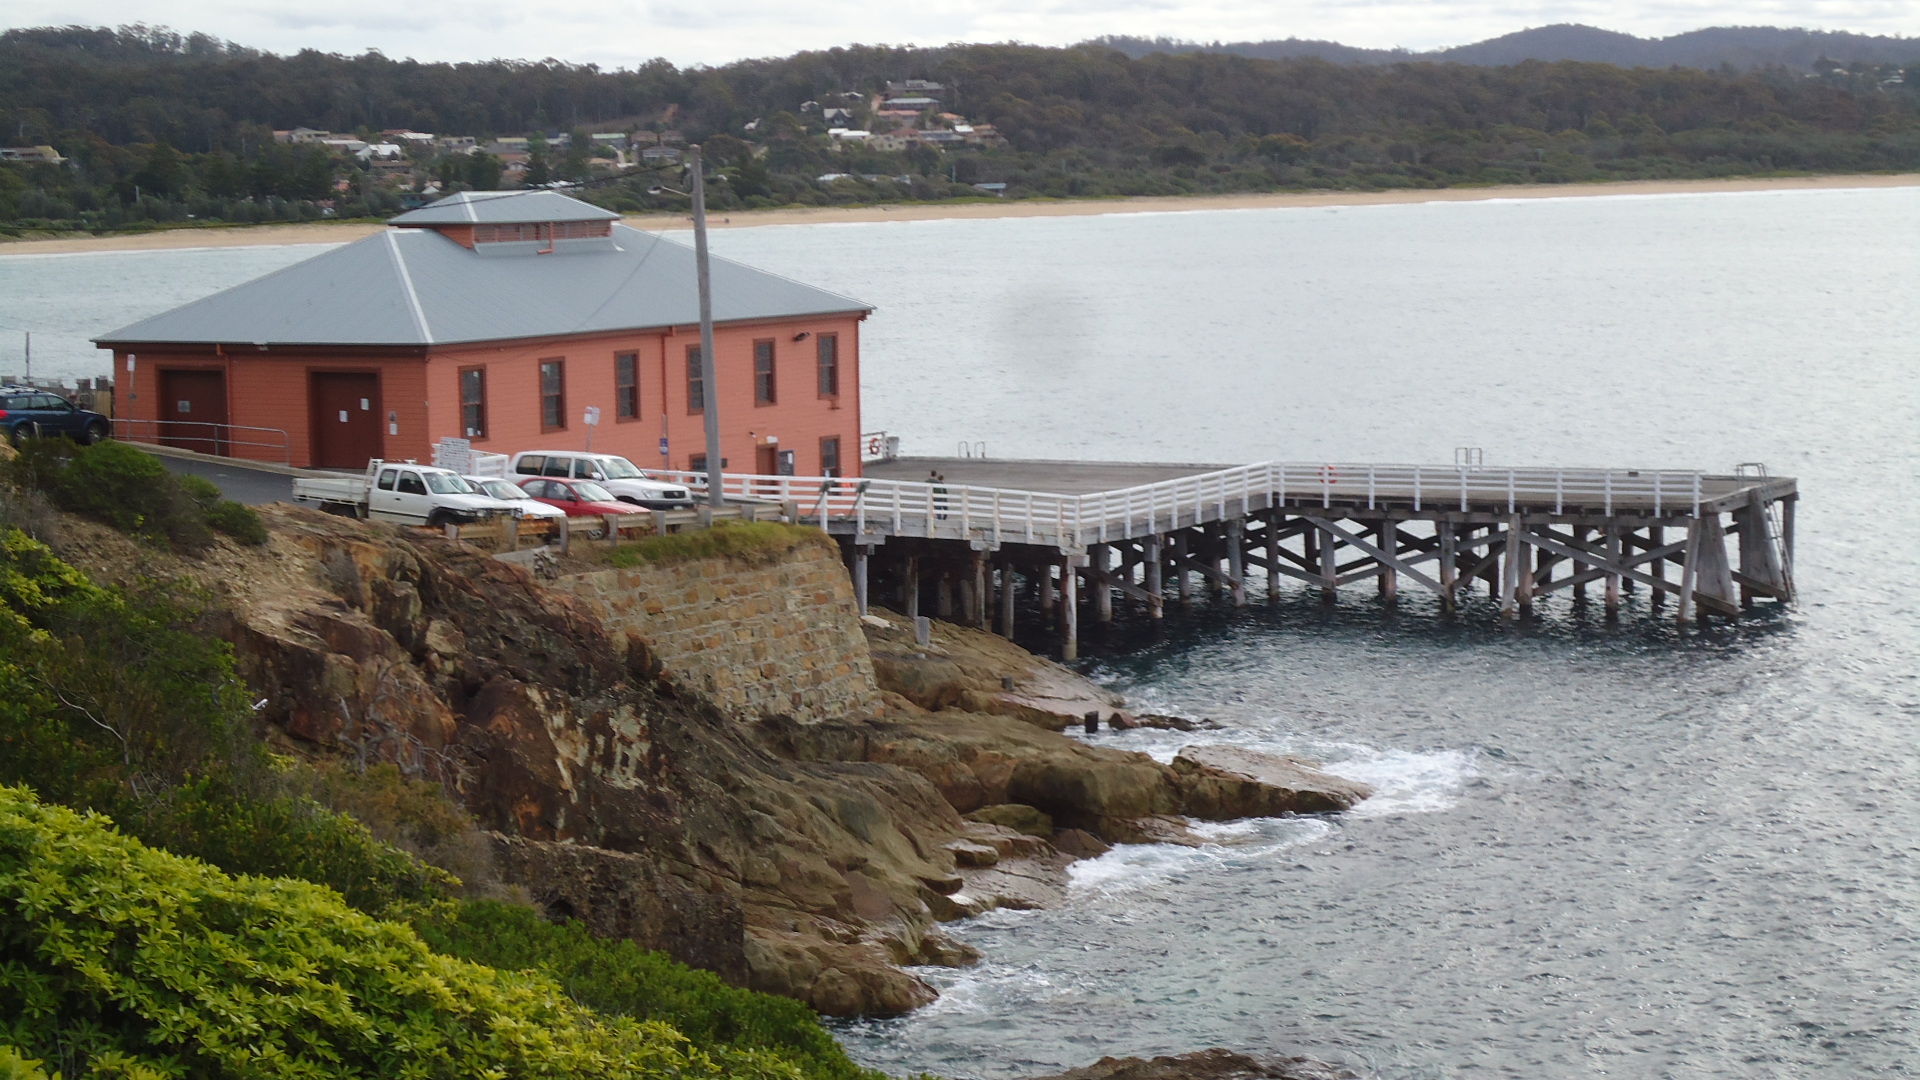 Call for community feedback on plans to restore Tathra Wharf